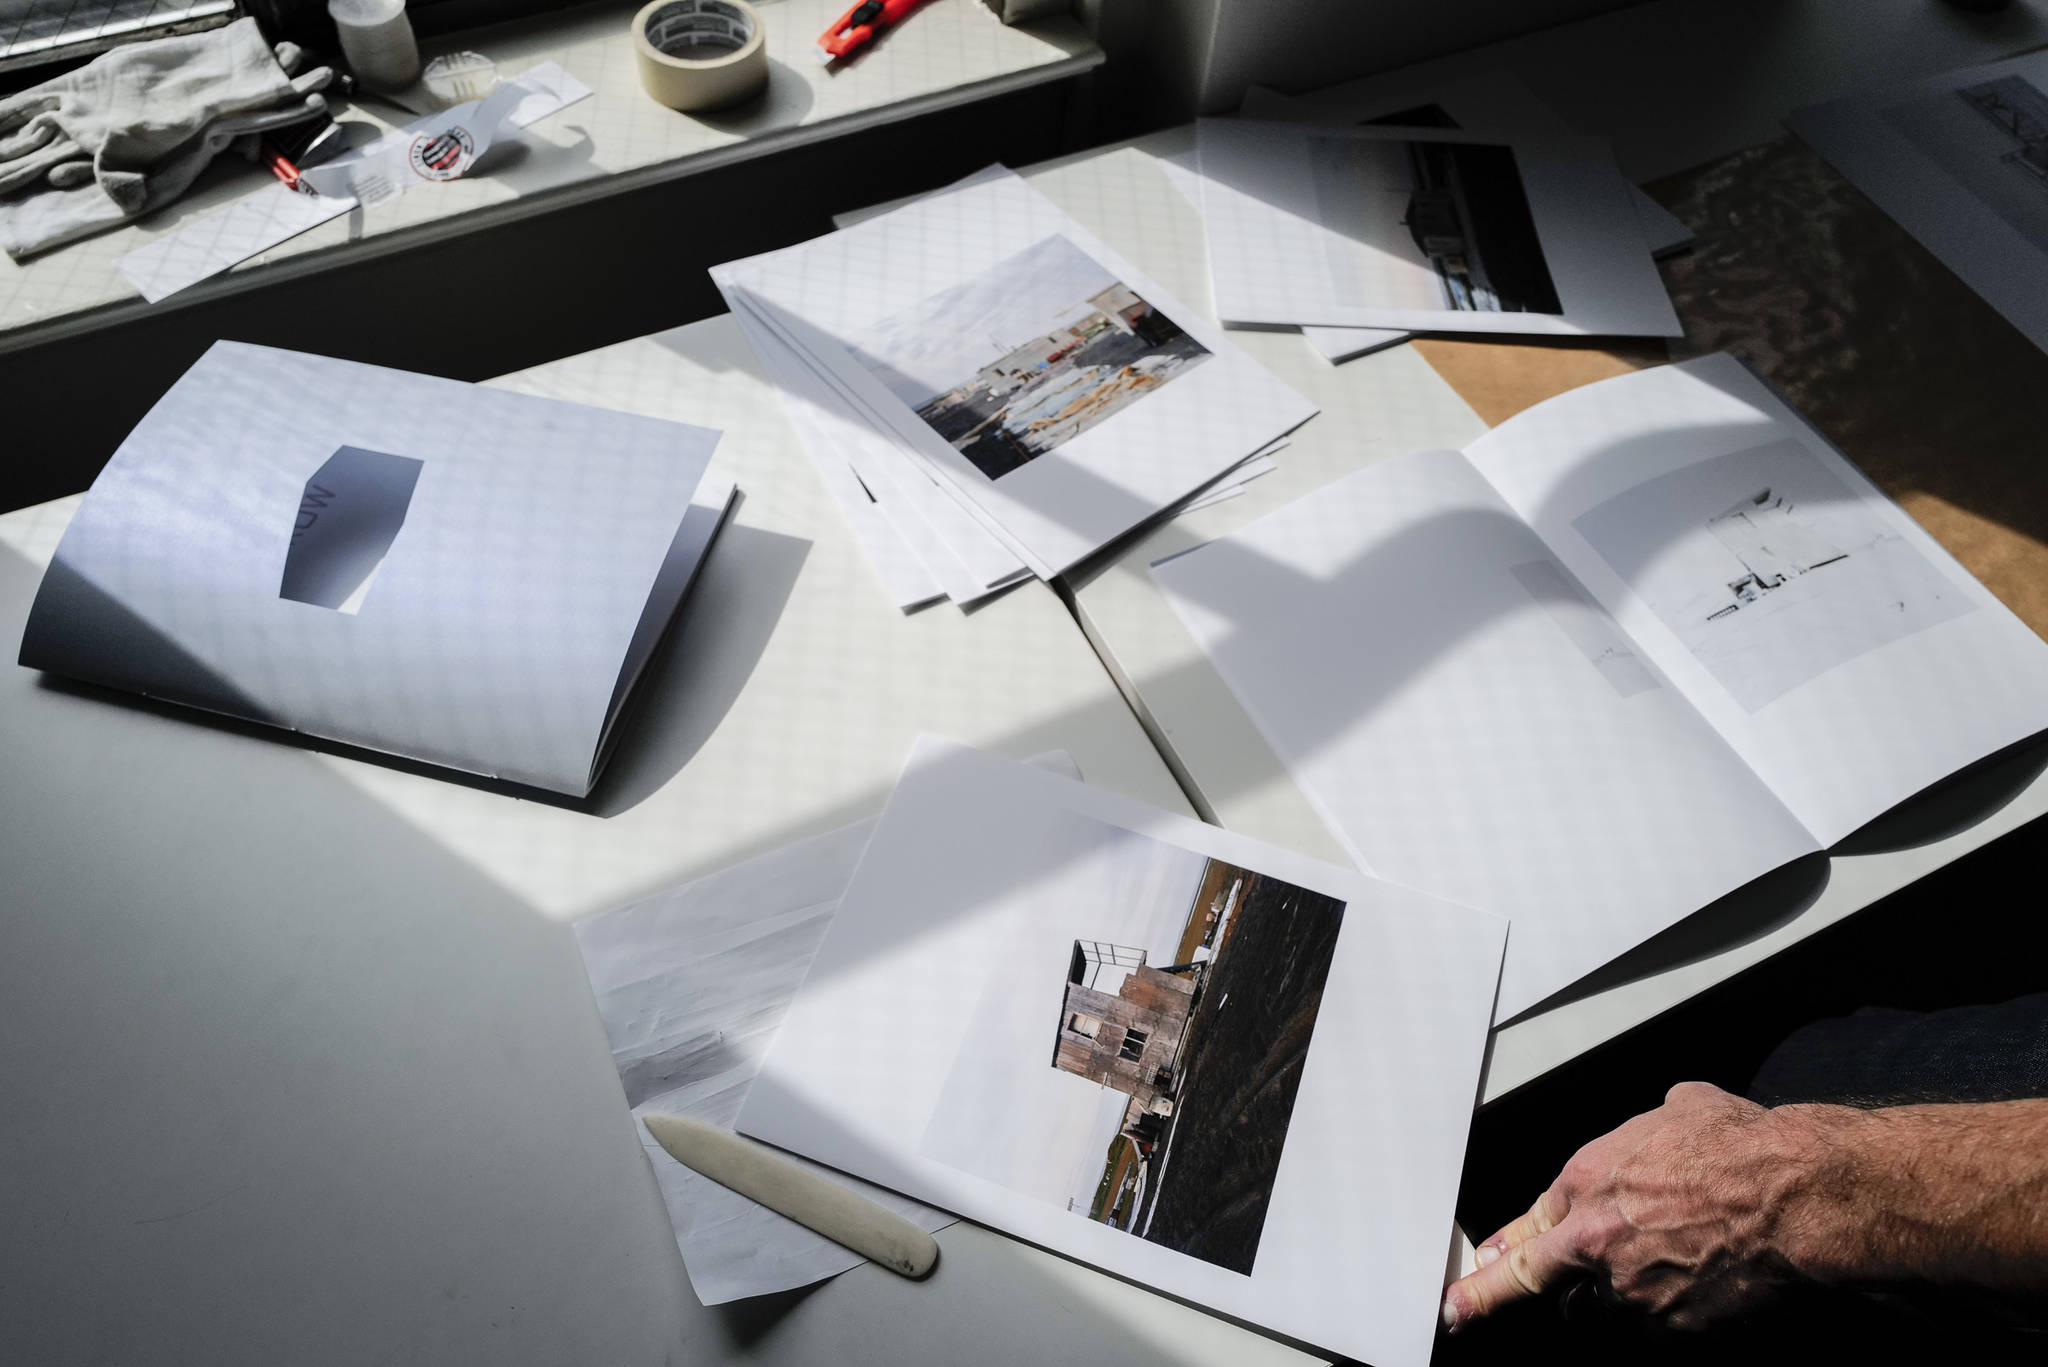 Seattle-based photographer Eirik Johnson works with Ben Huff, a local photographer and editor of Ice Fog Press, on a hand-made book of Johnson’s photographs titled “Barrow Cabins” on Wednesday, Aug. 21, 2019. (Michael Penn | Juneau Empire)